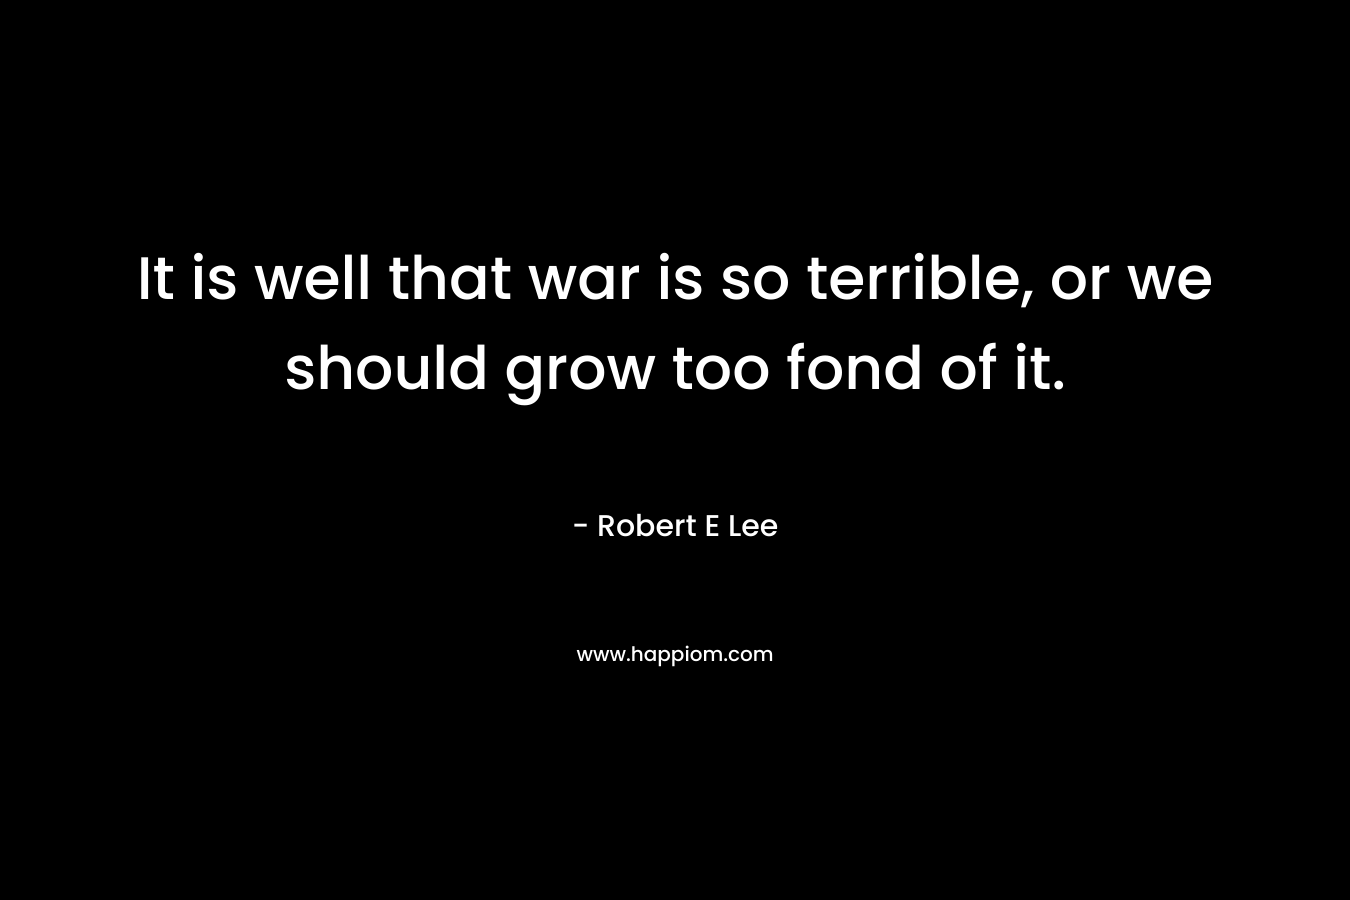 It is well that war is so terrible, or we should grow too fond of it. – Robert E Lee